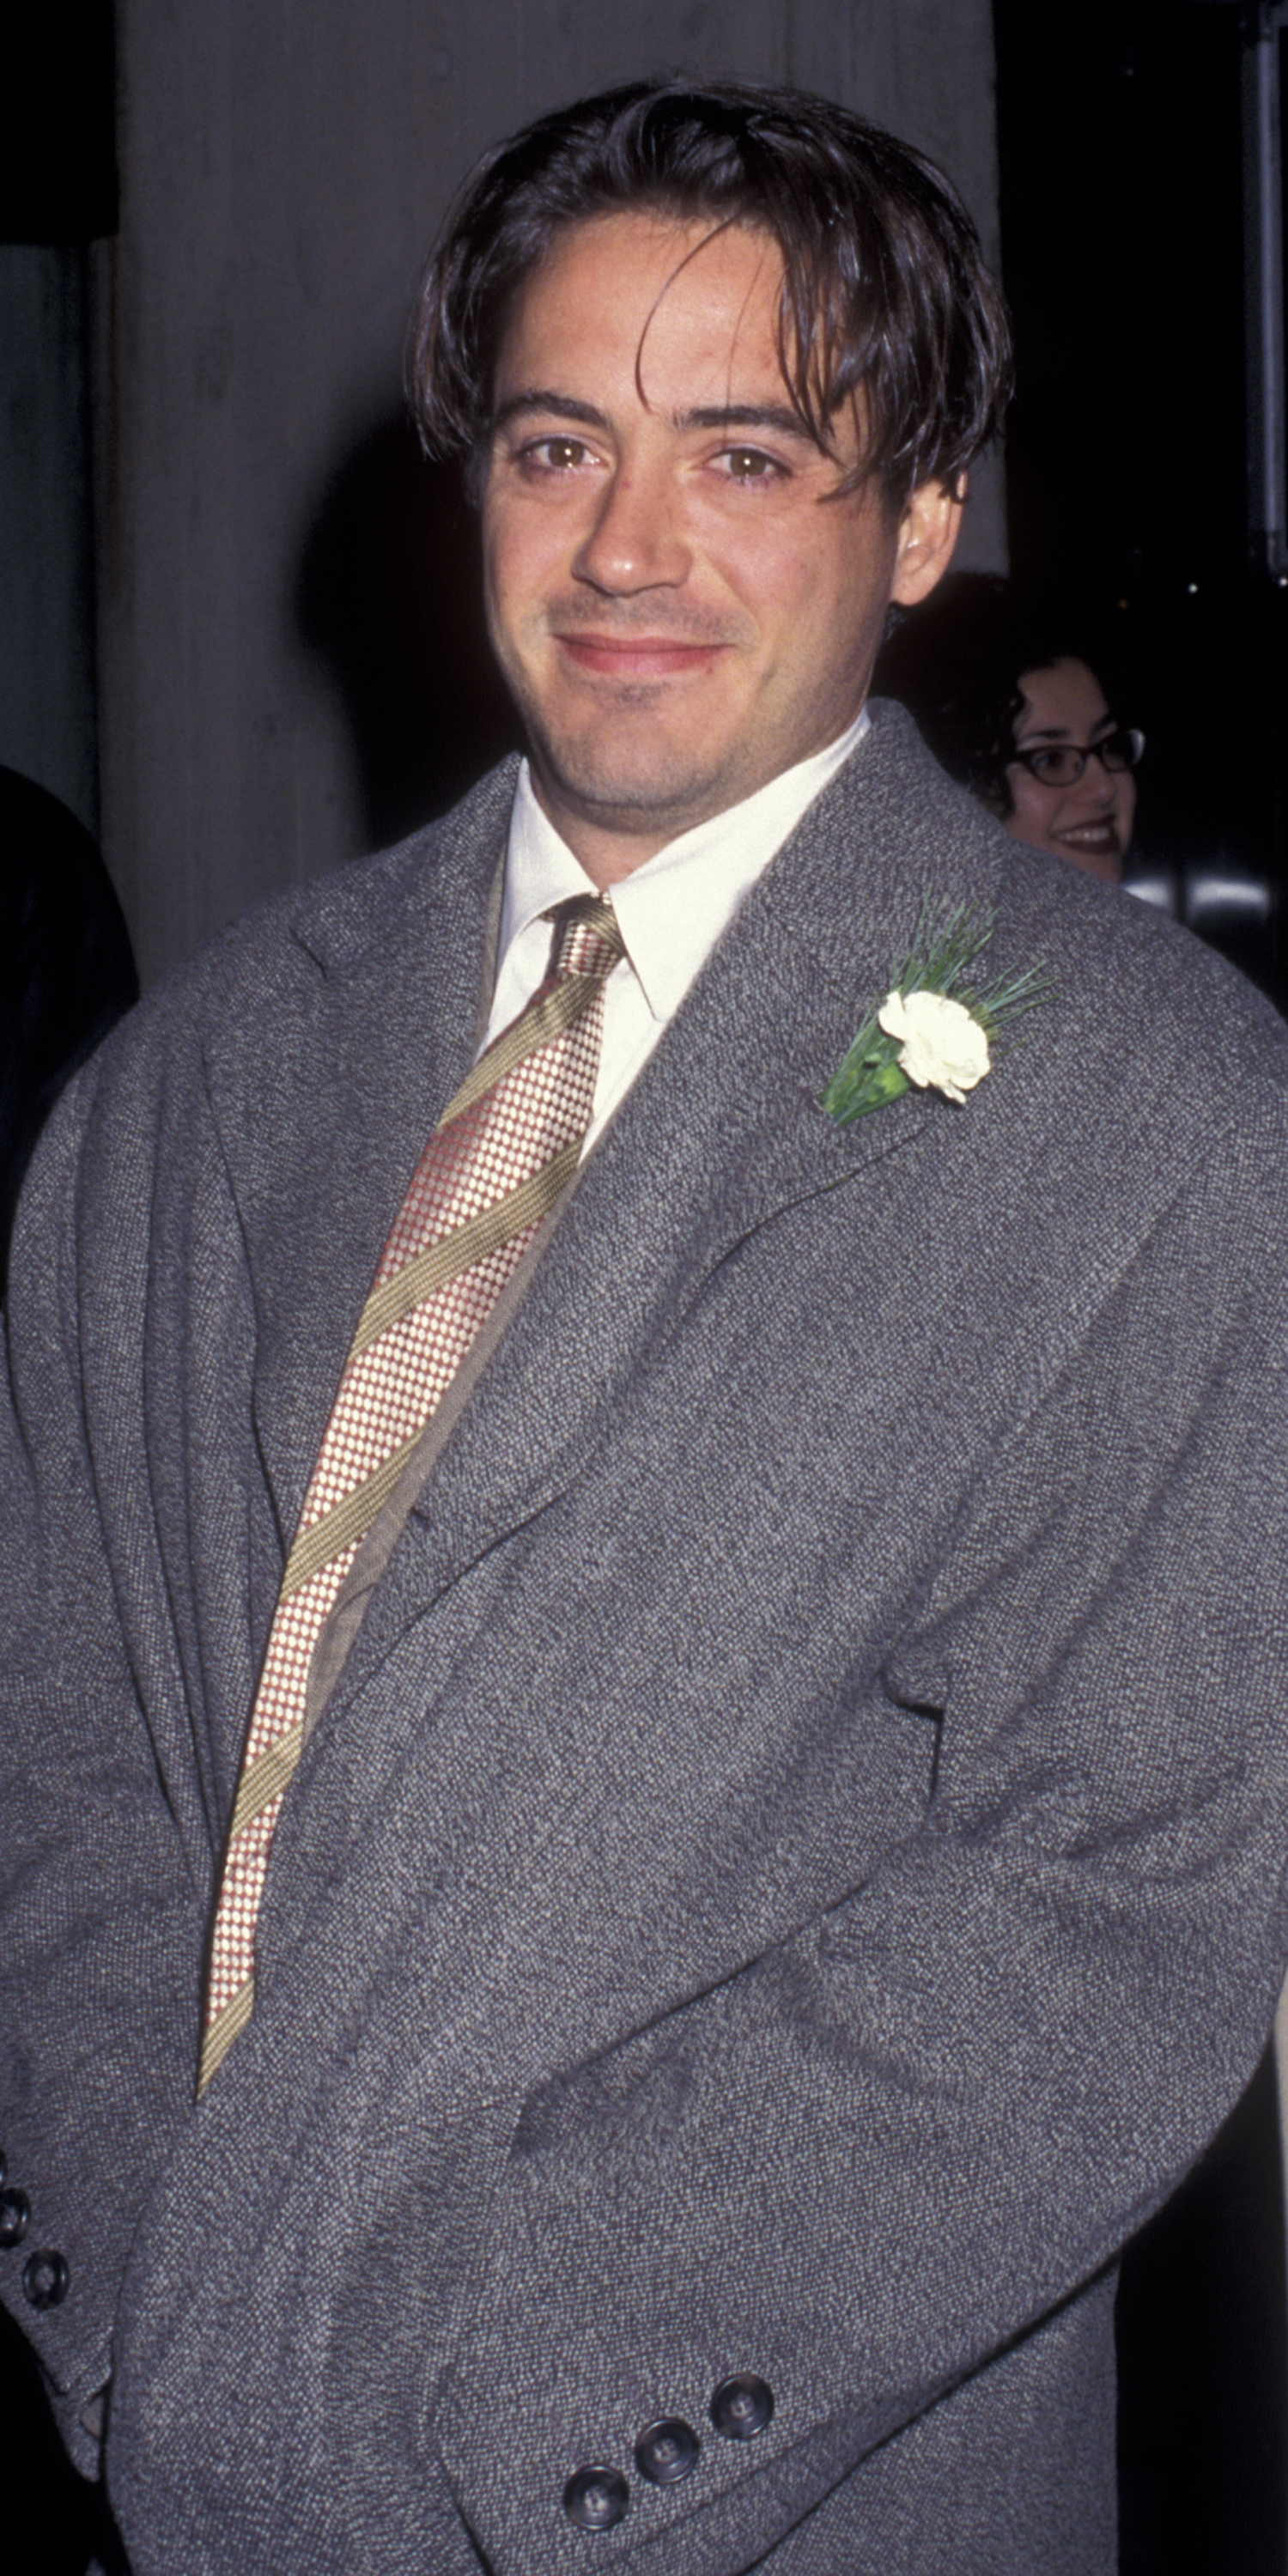 Robert Downey Jr. at the premiere of "Restoration" in New York in 1991 | Source: Getty Images